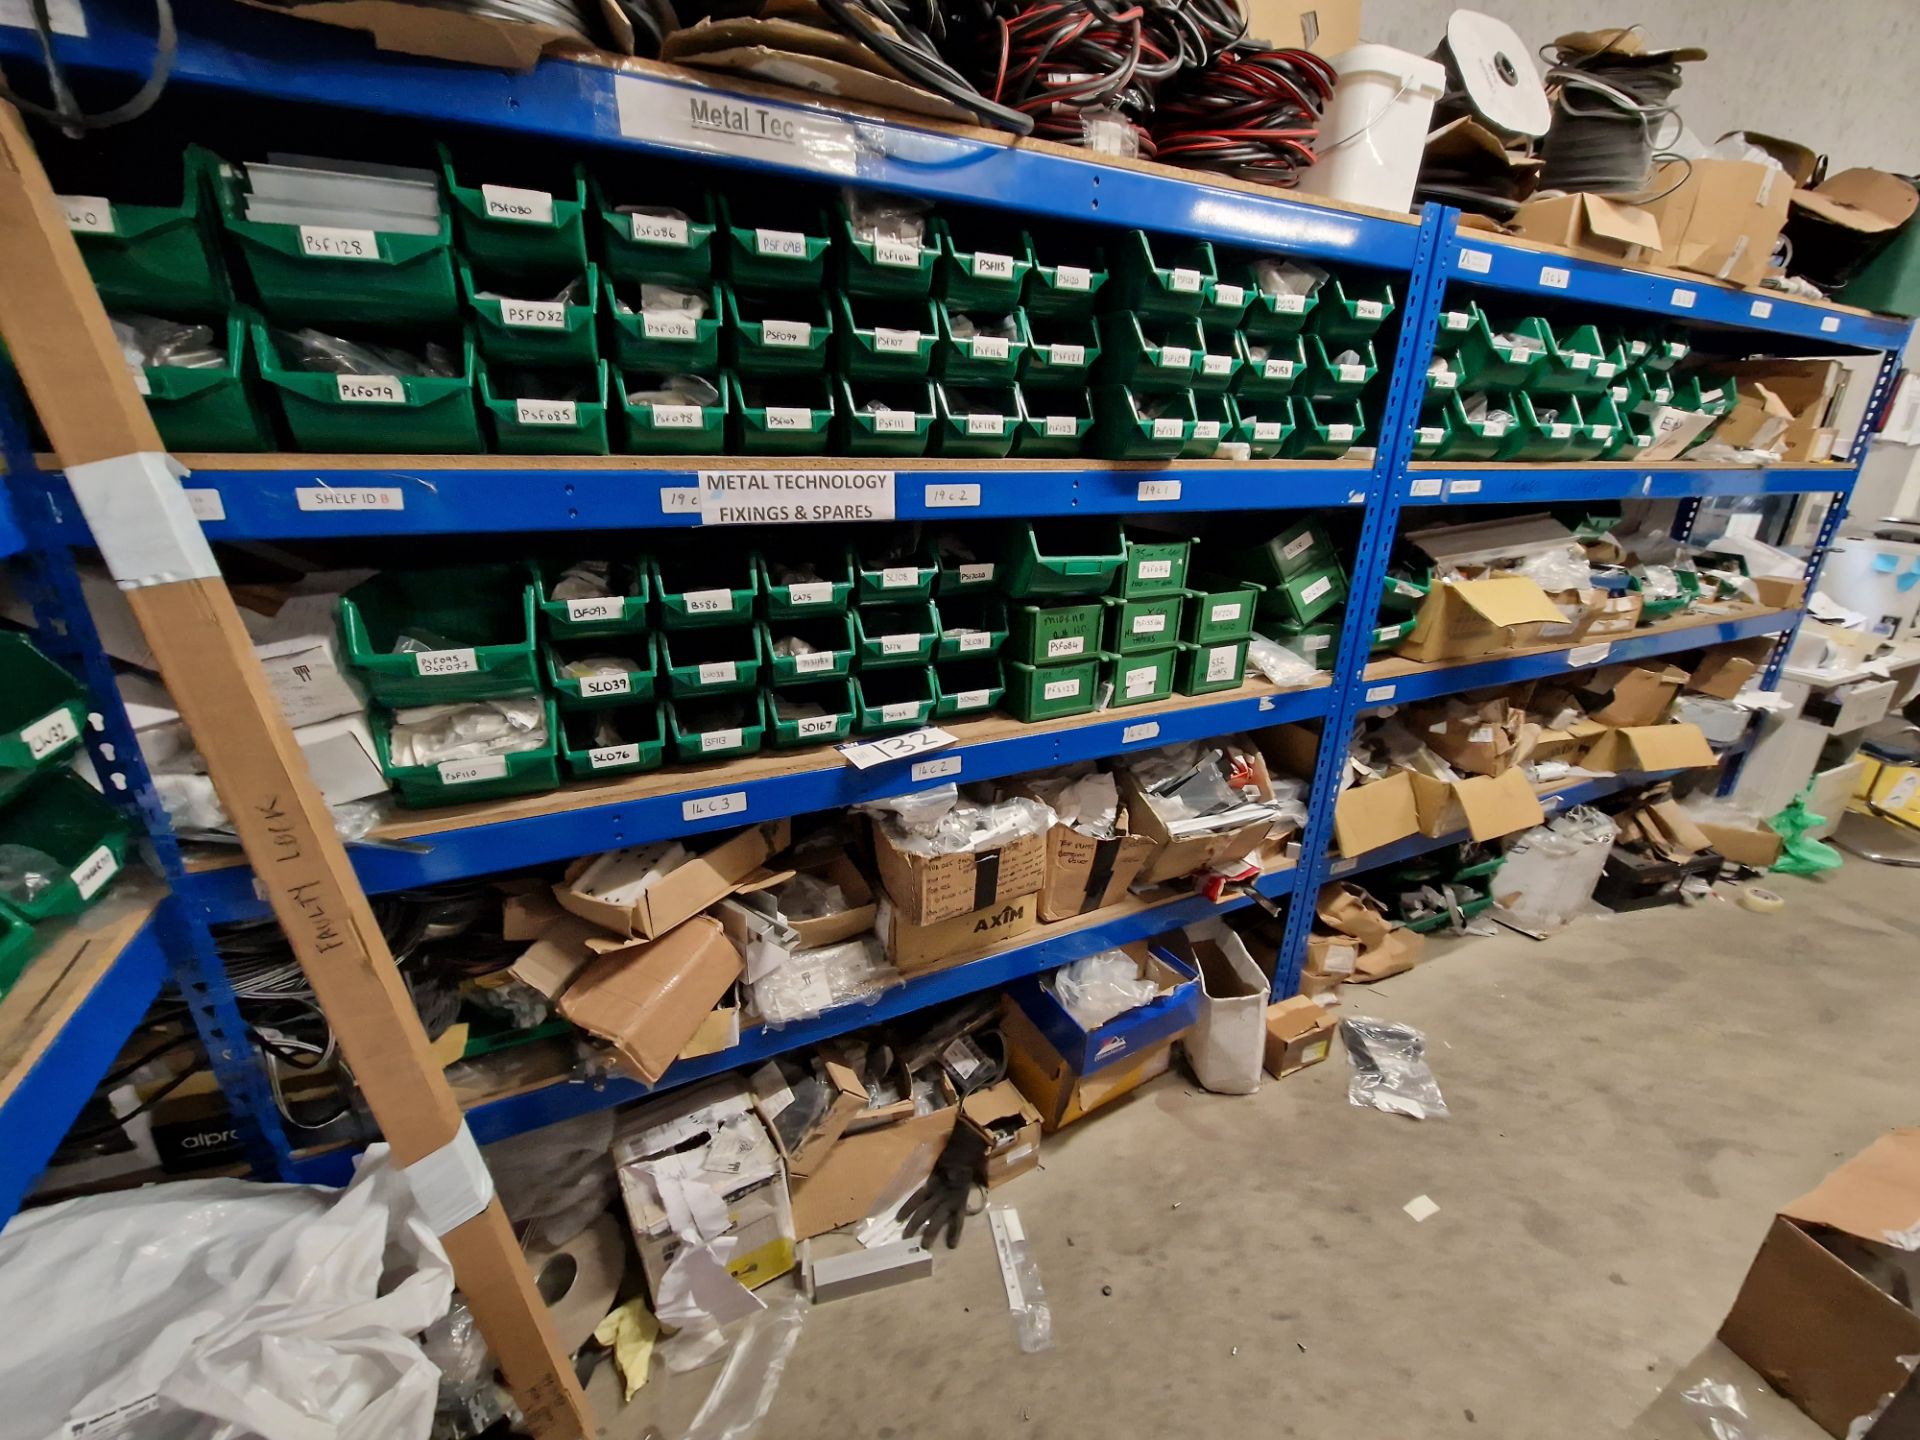 Contents to Two Bays of Shelving, including Rubber Gaskets, Aluminium Profile, End Caps, Screws,